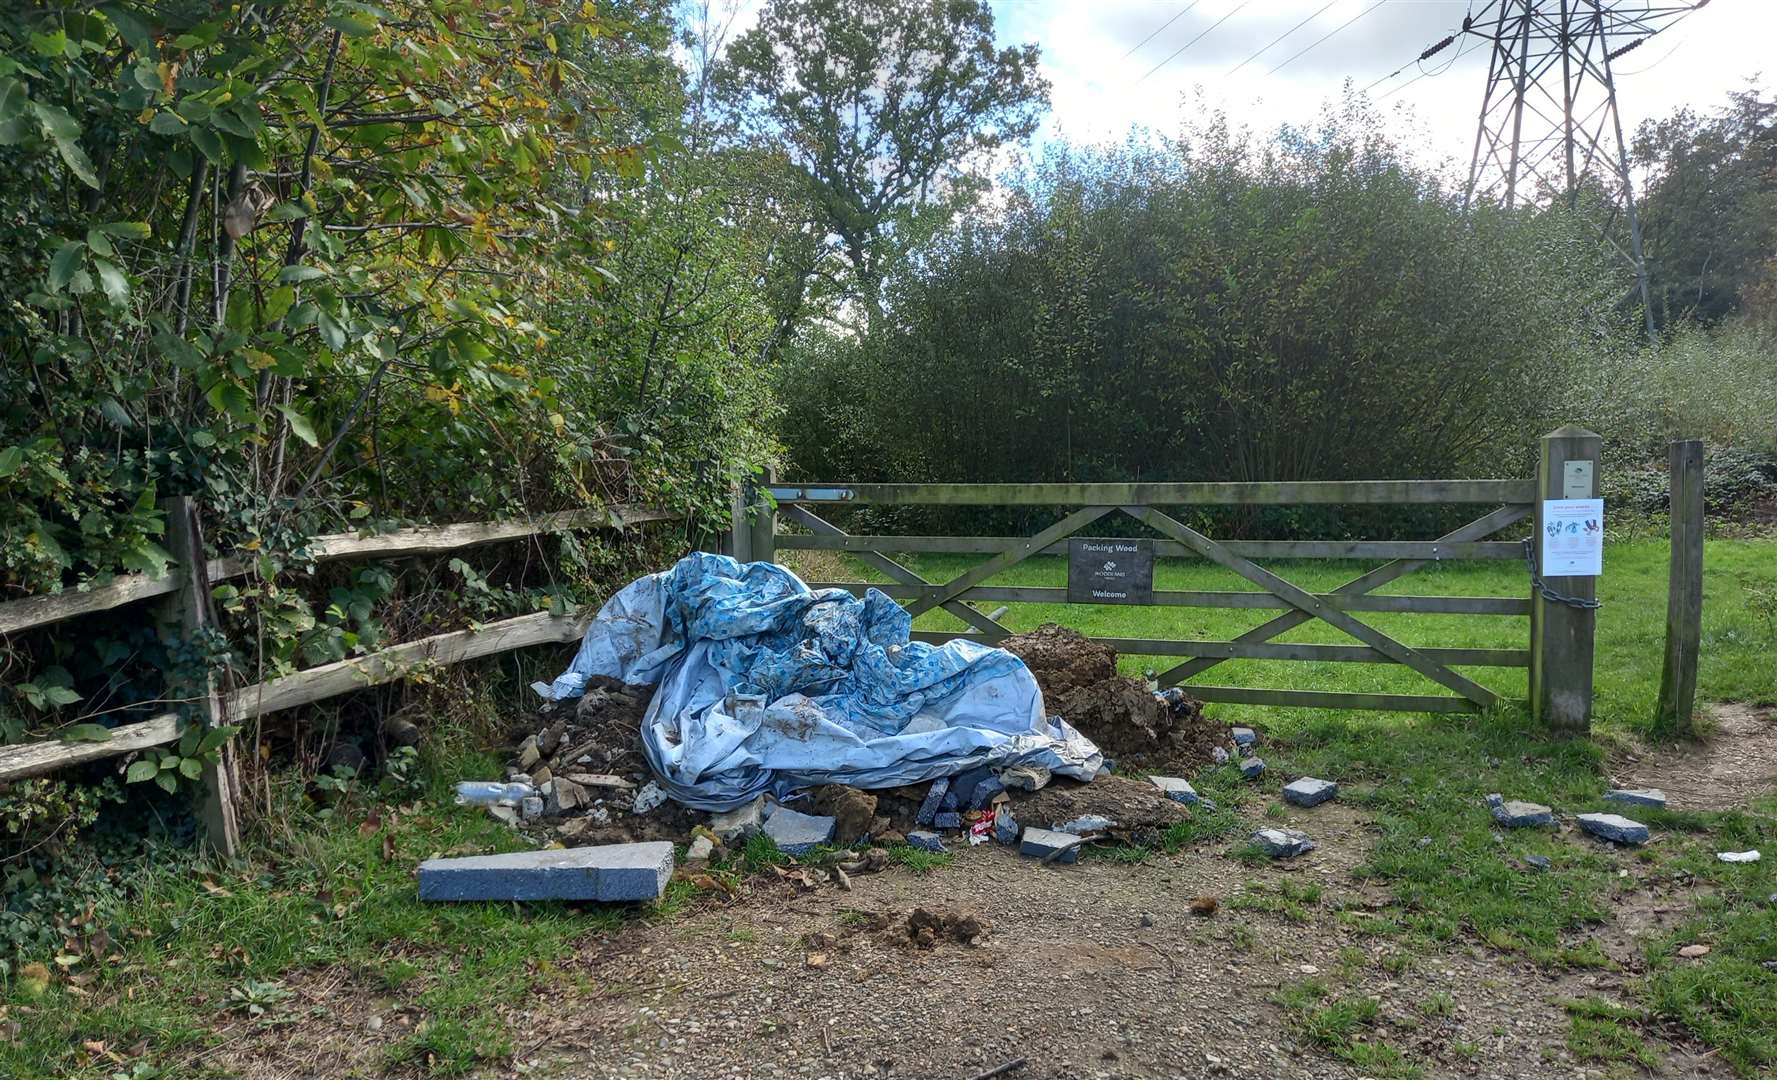 The flytip in Capel Road, Ashford. Photo: ABC